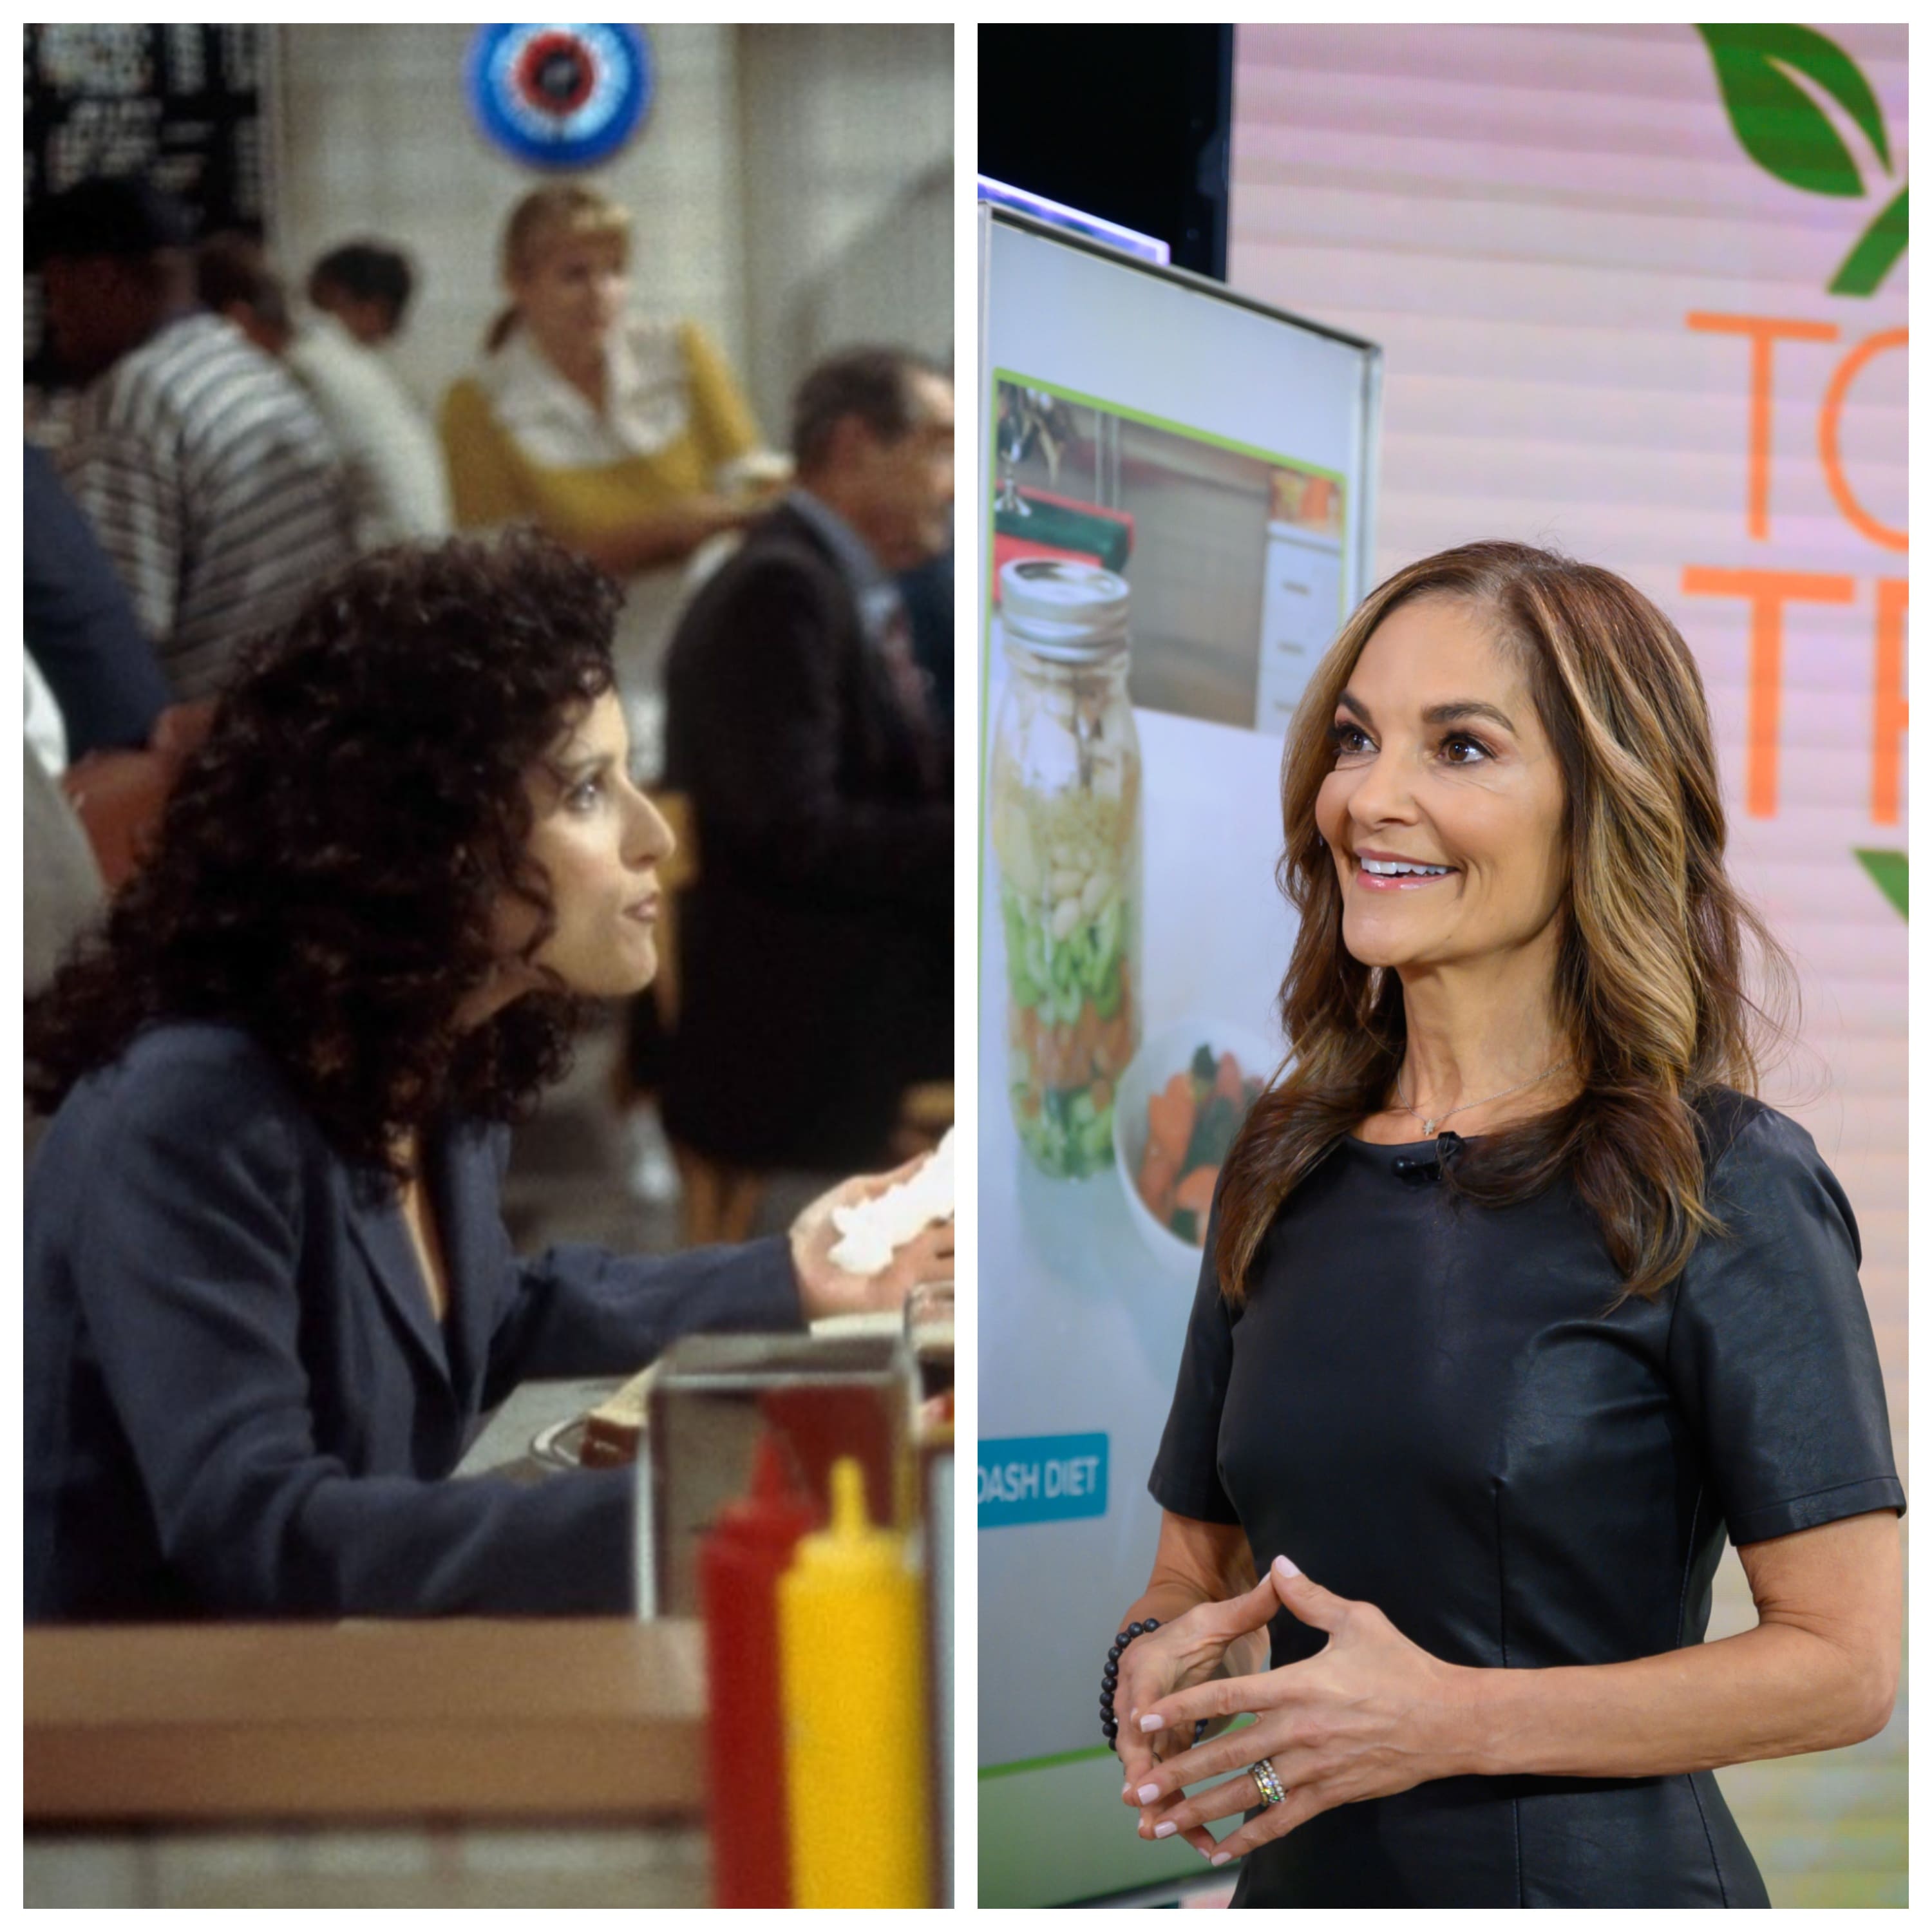 Julia Louis-Dreyfus in 'Seinfeld' and Joy Bauer on 'Today'